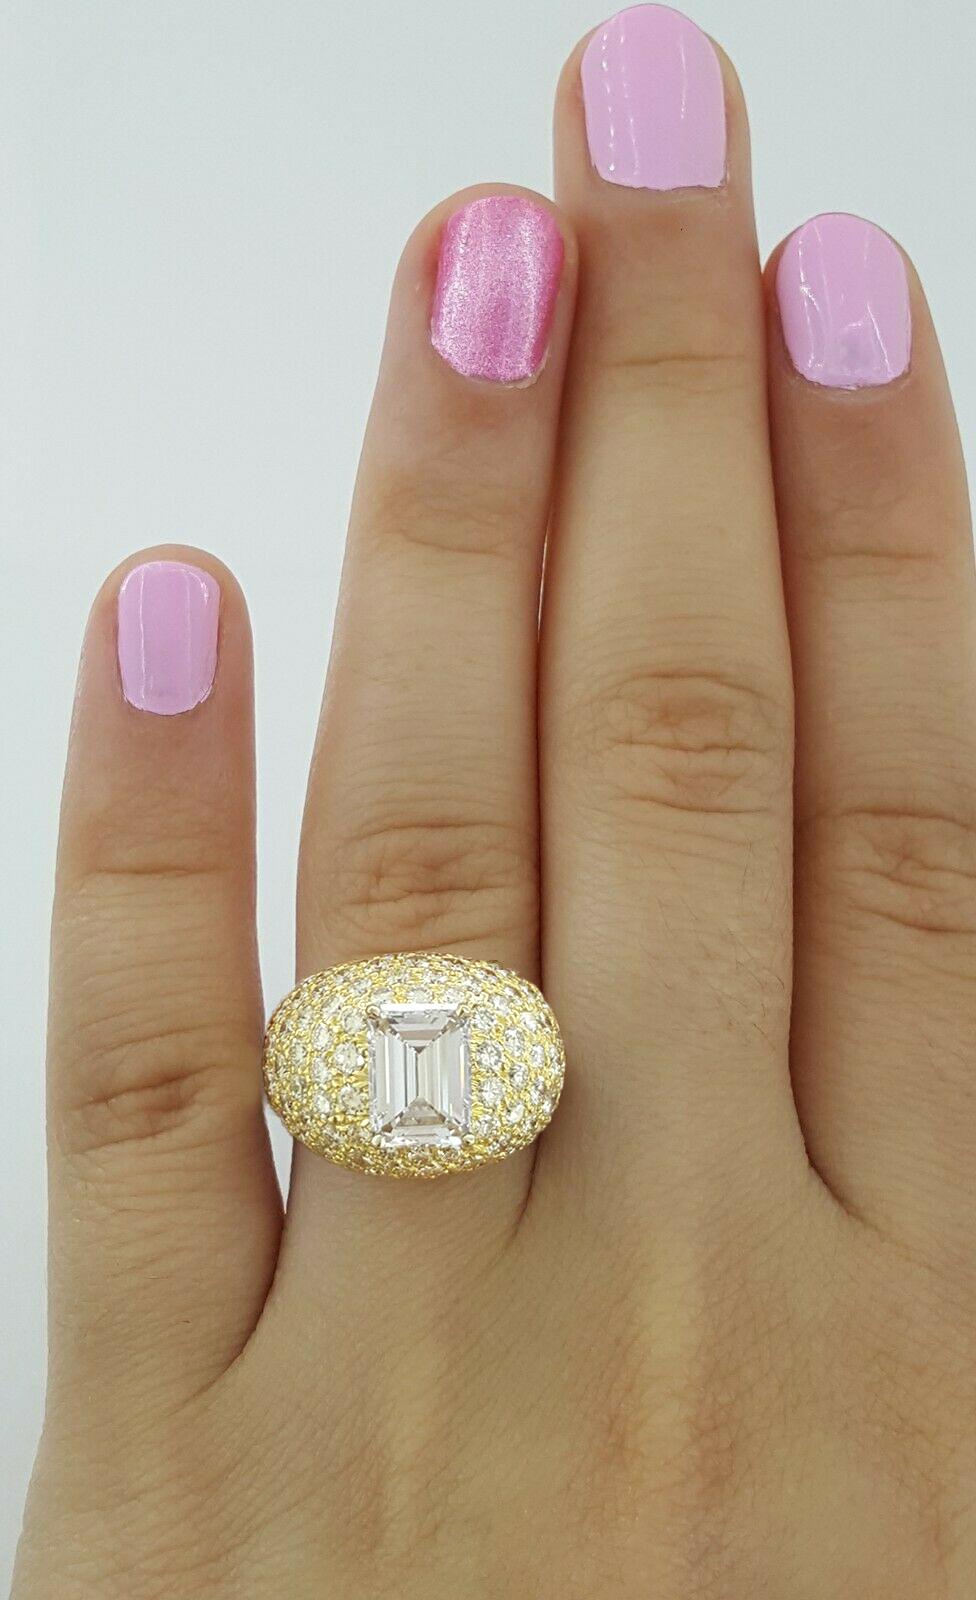 David Webb Emerald Cut Round Brilliant Pave Diamond Ring

the center stone weights 2.88 carats E color VS1 clarity

